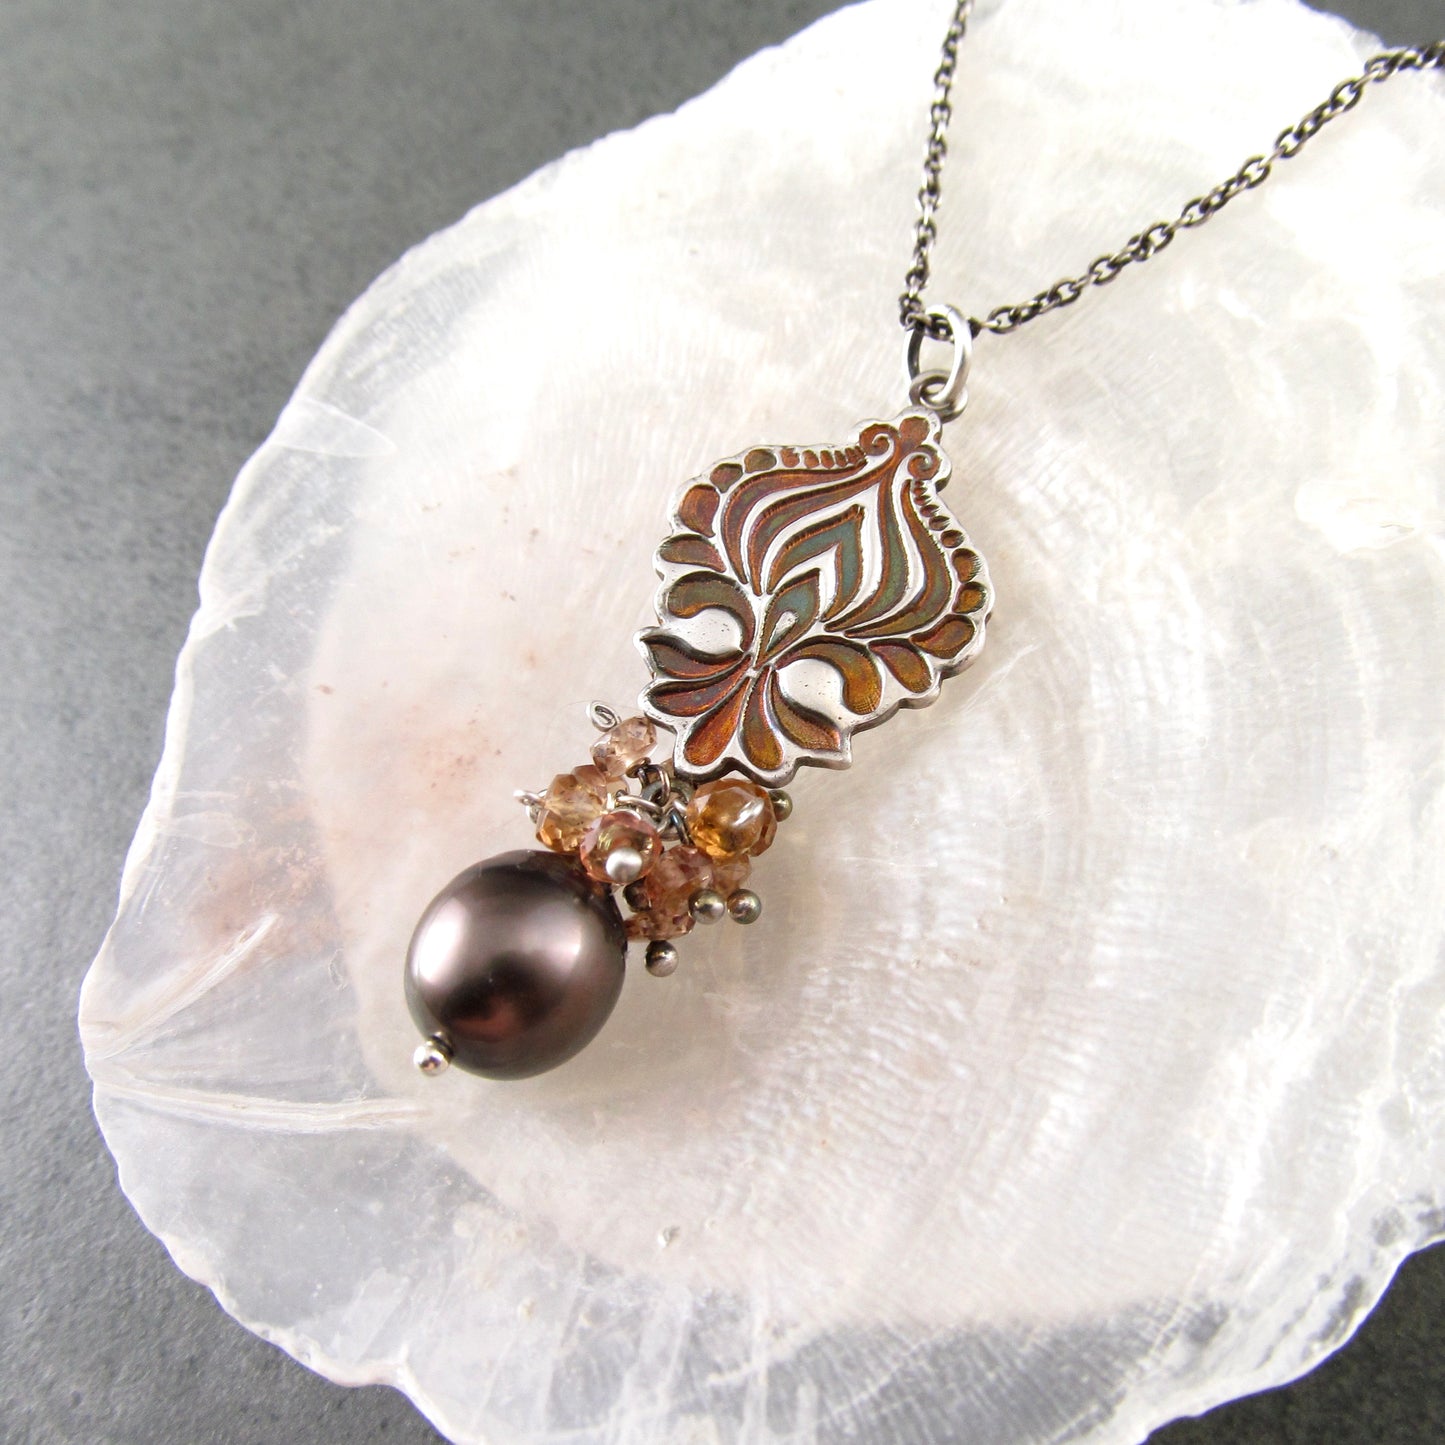 Mocha Tahitian Pearl pendant in fine silver with color change garnets